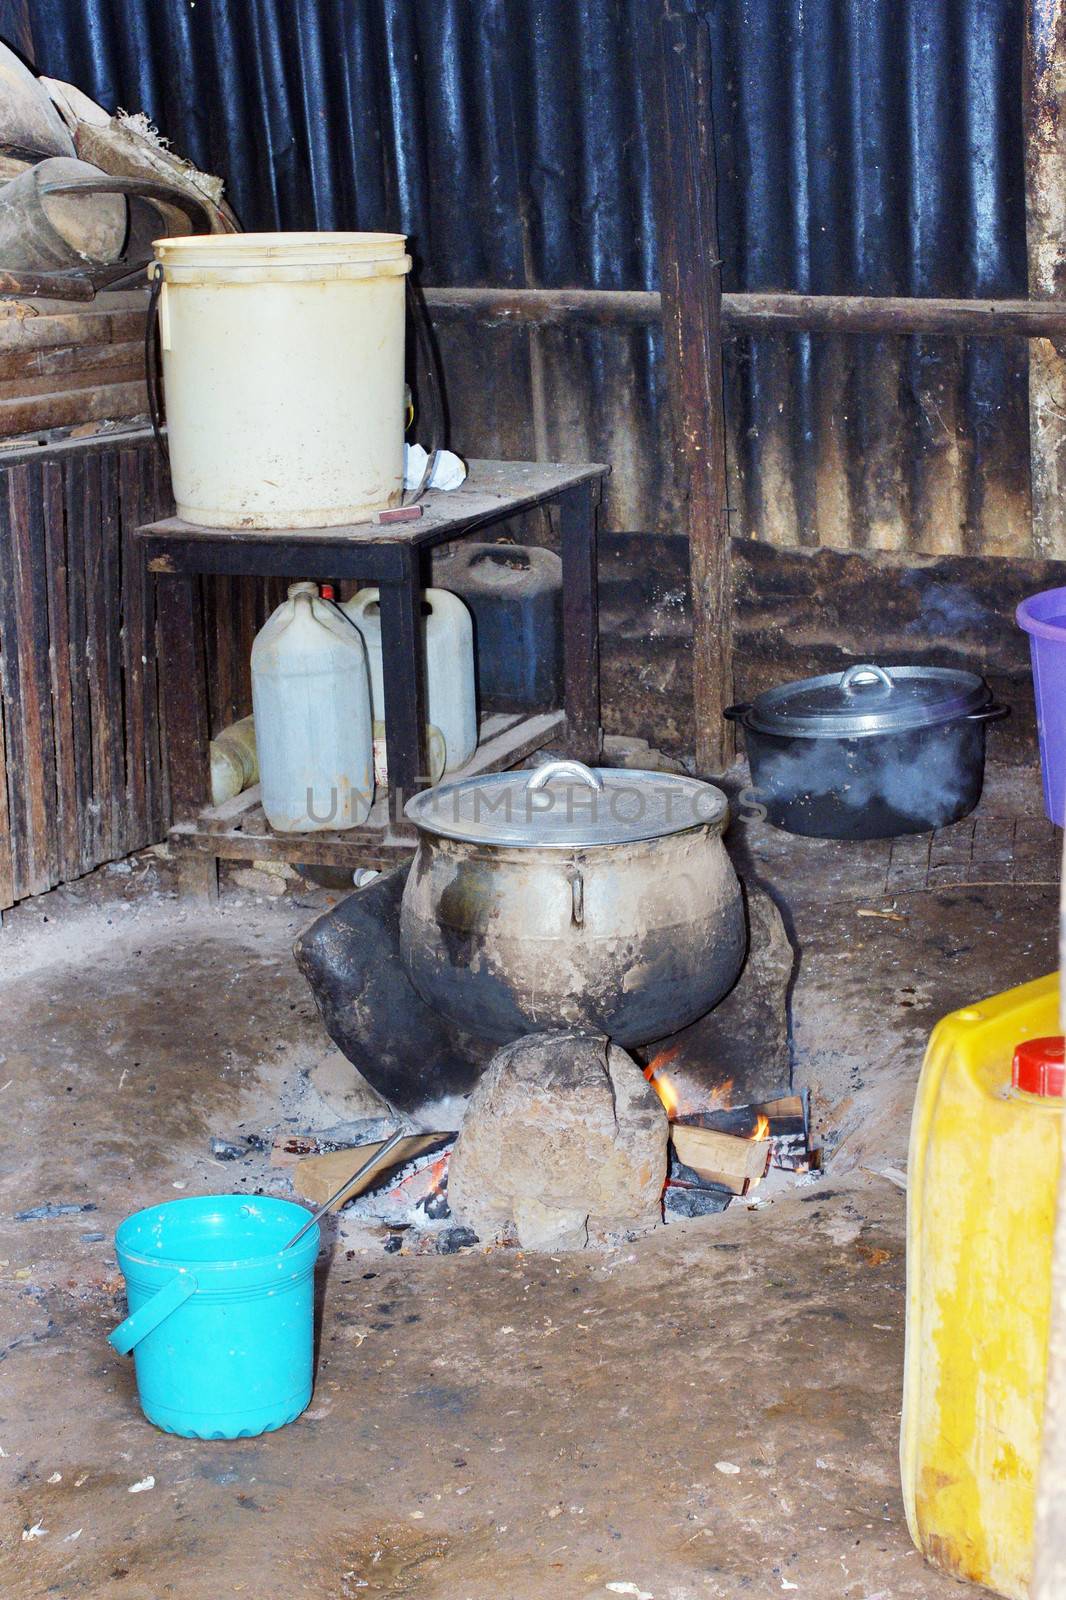 Typical African kitchen by Mirage3